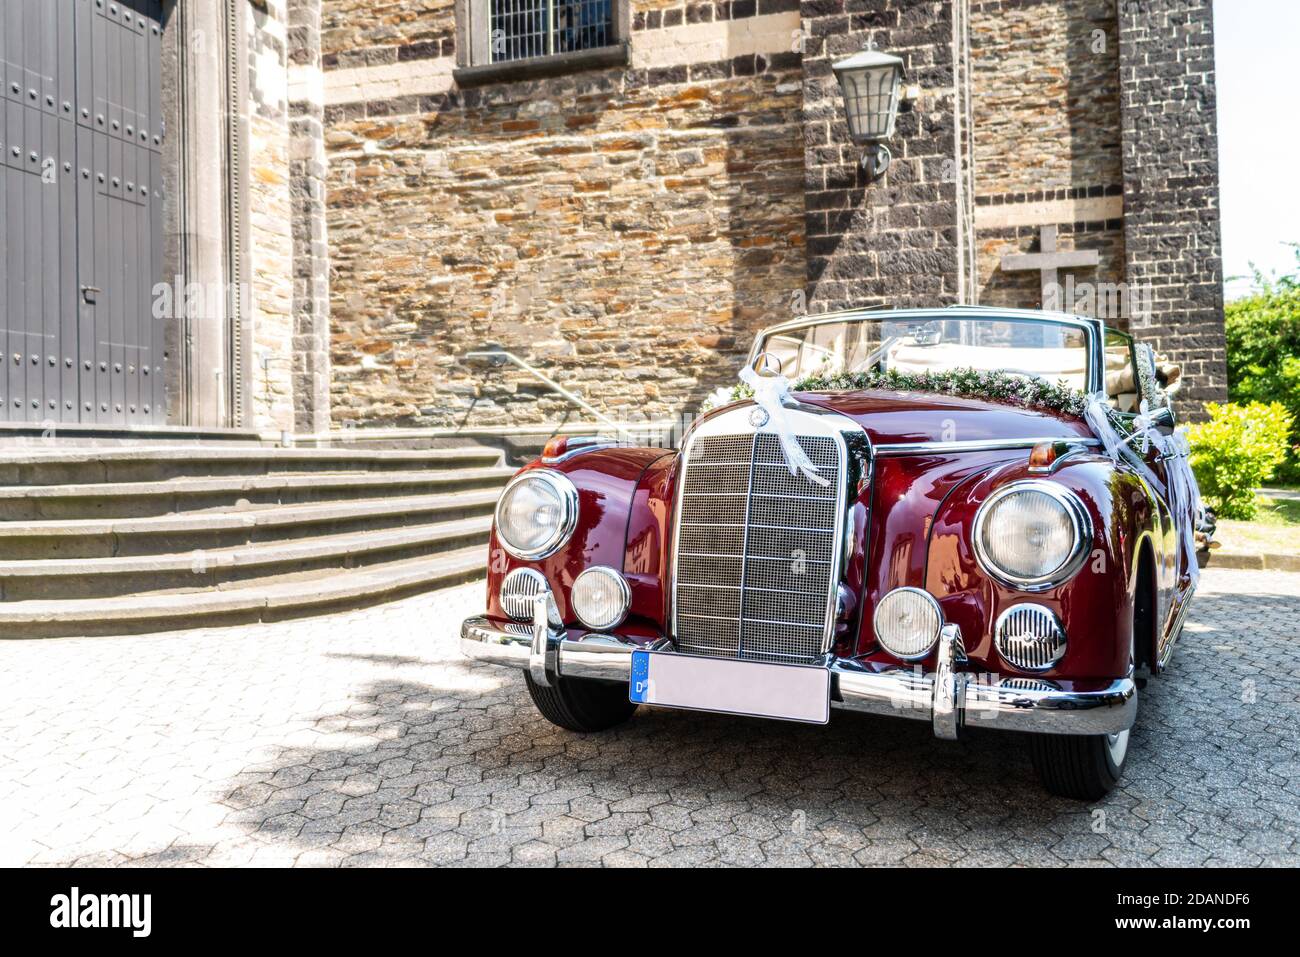 Ochtendung Germany 25.05.2019 Mercedes-Benz Typ 300 Adenauer W186 Cabriolet luxury executive classic German 1950s car decorated for a wedding with flo Stock Photo